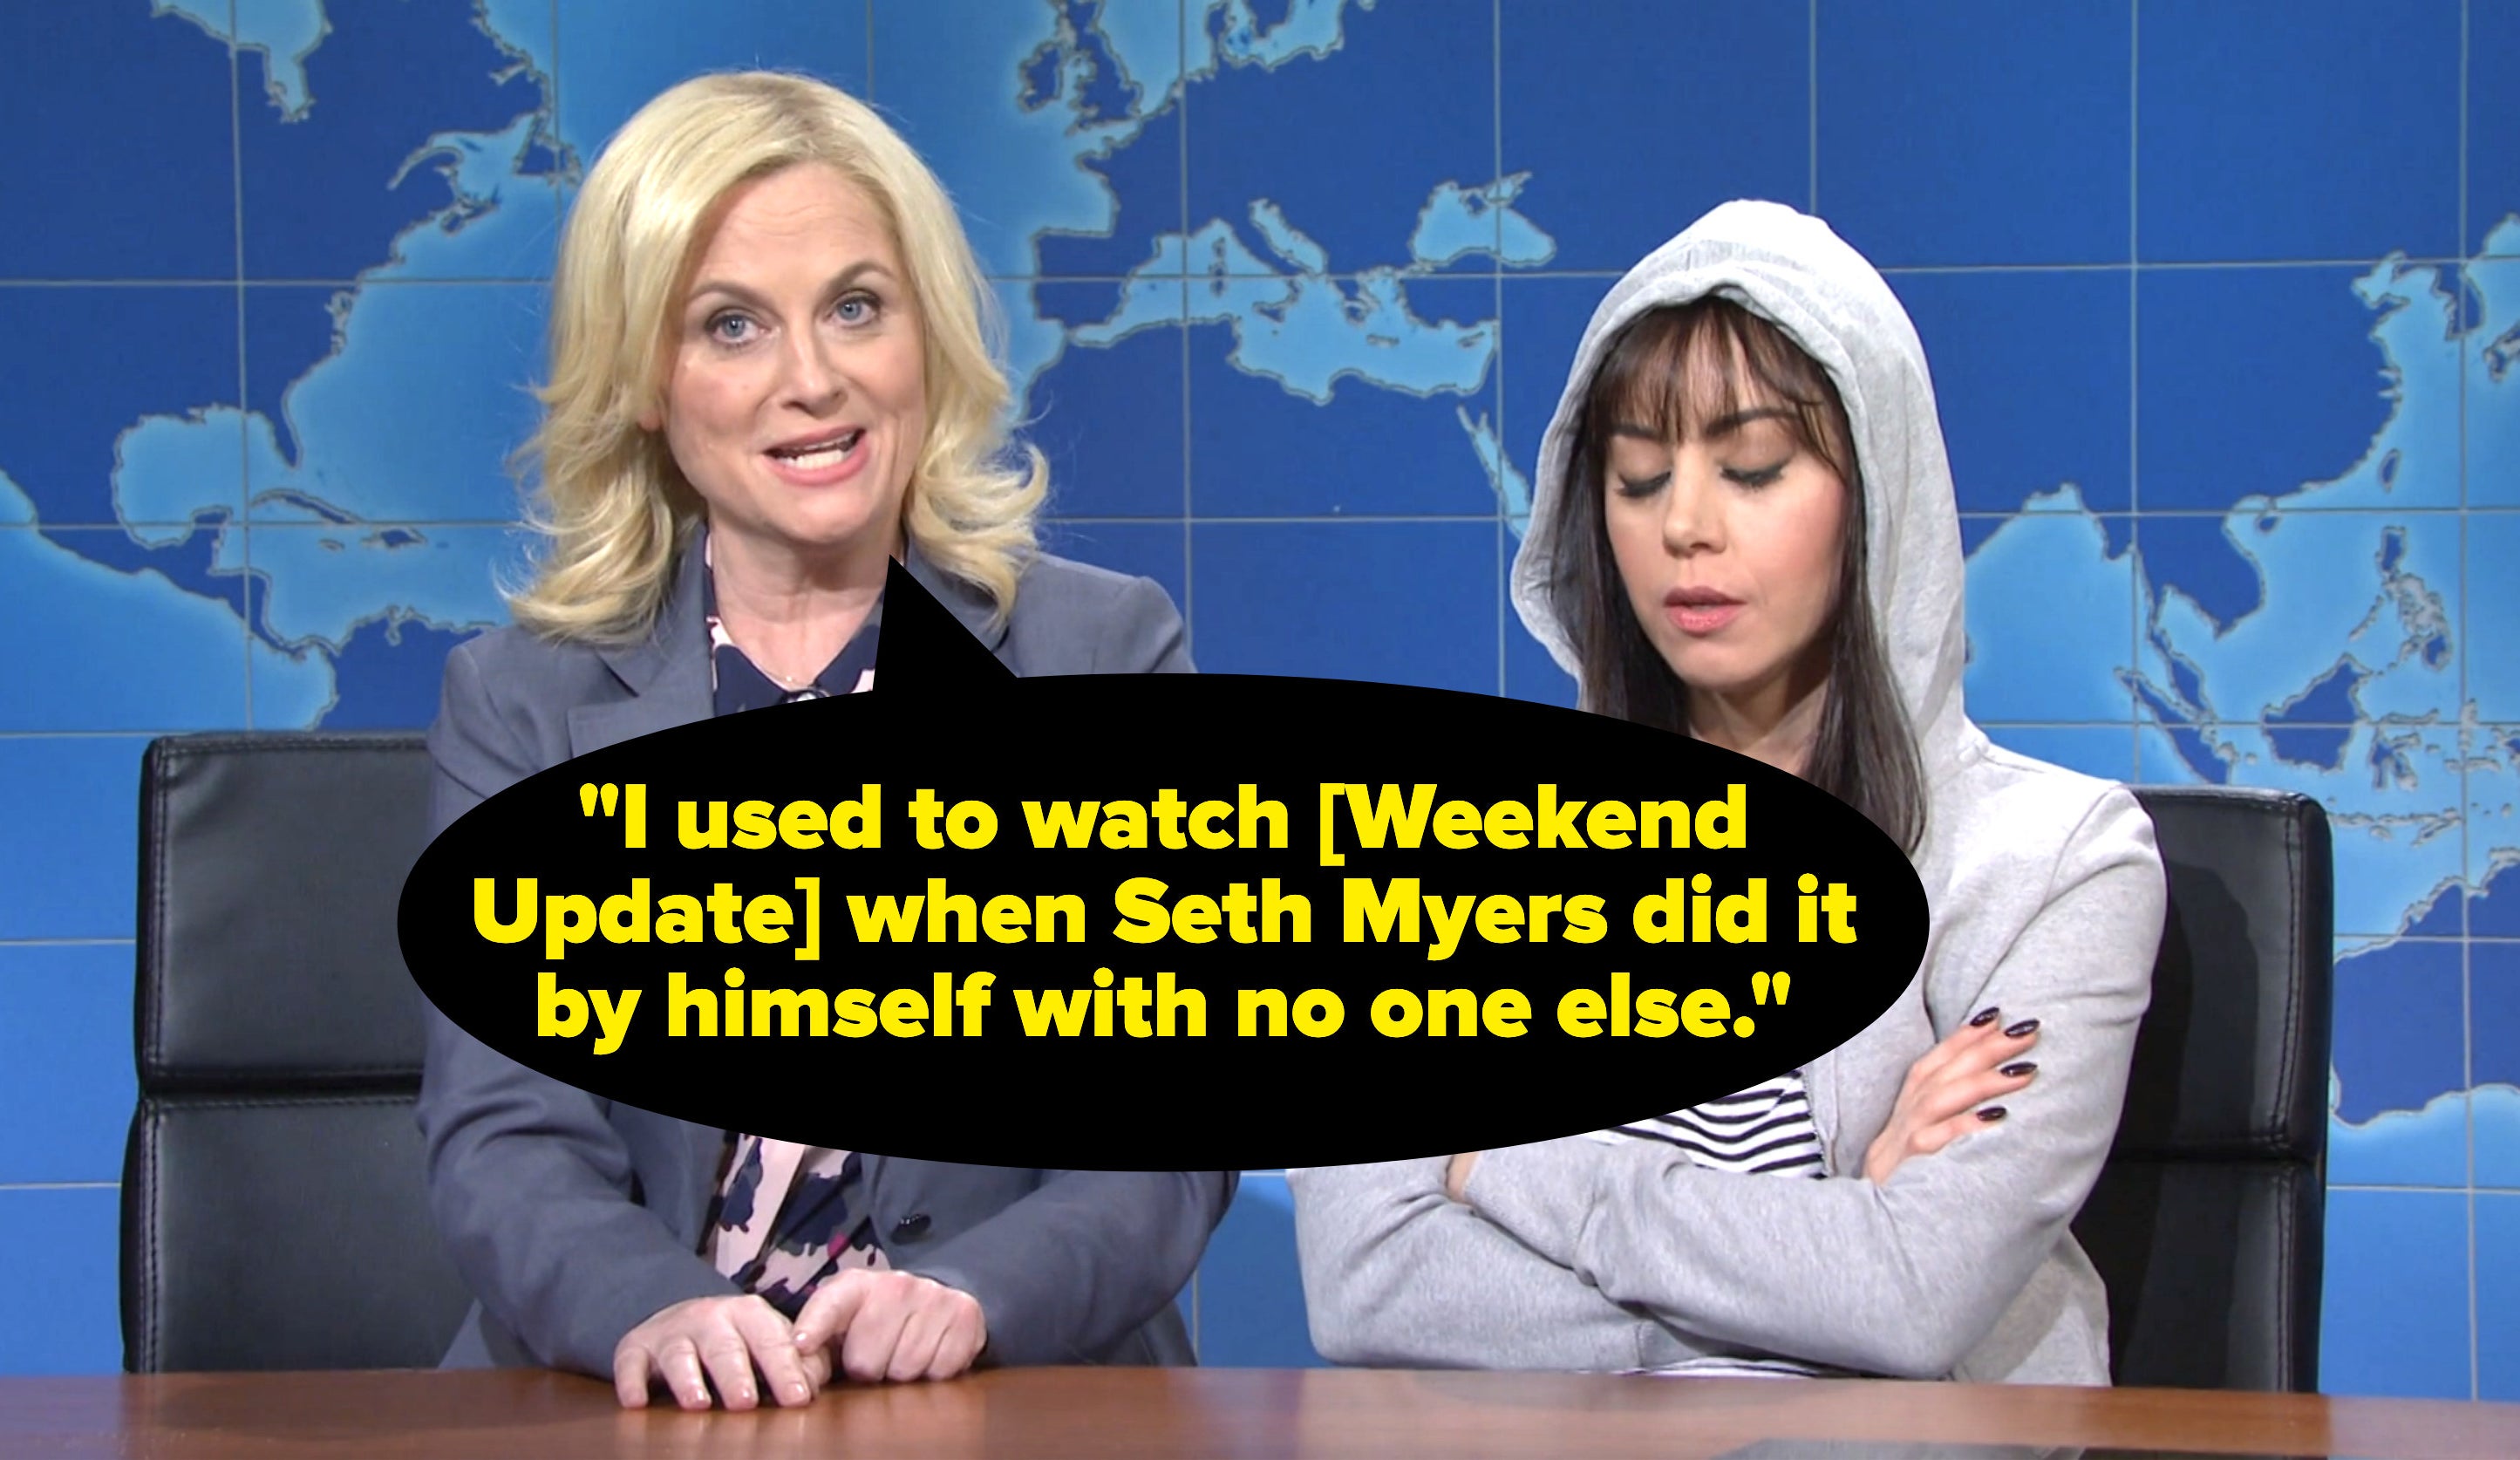 Amy says &quot;I used to watch [Weekend Update] when Seth Myers did it by himself with no else&quot;